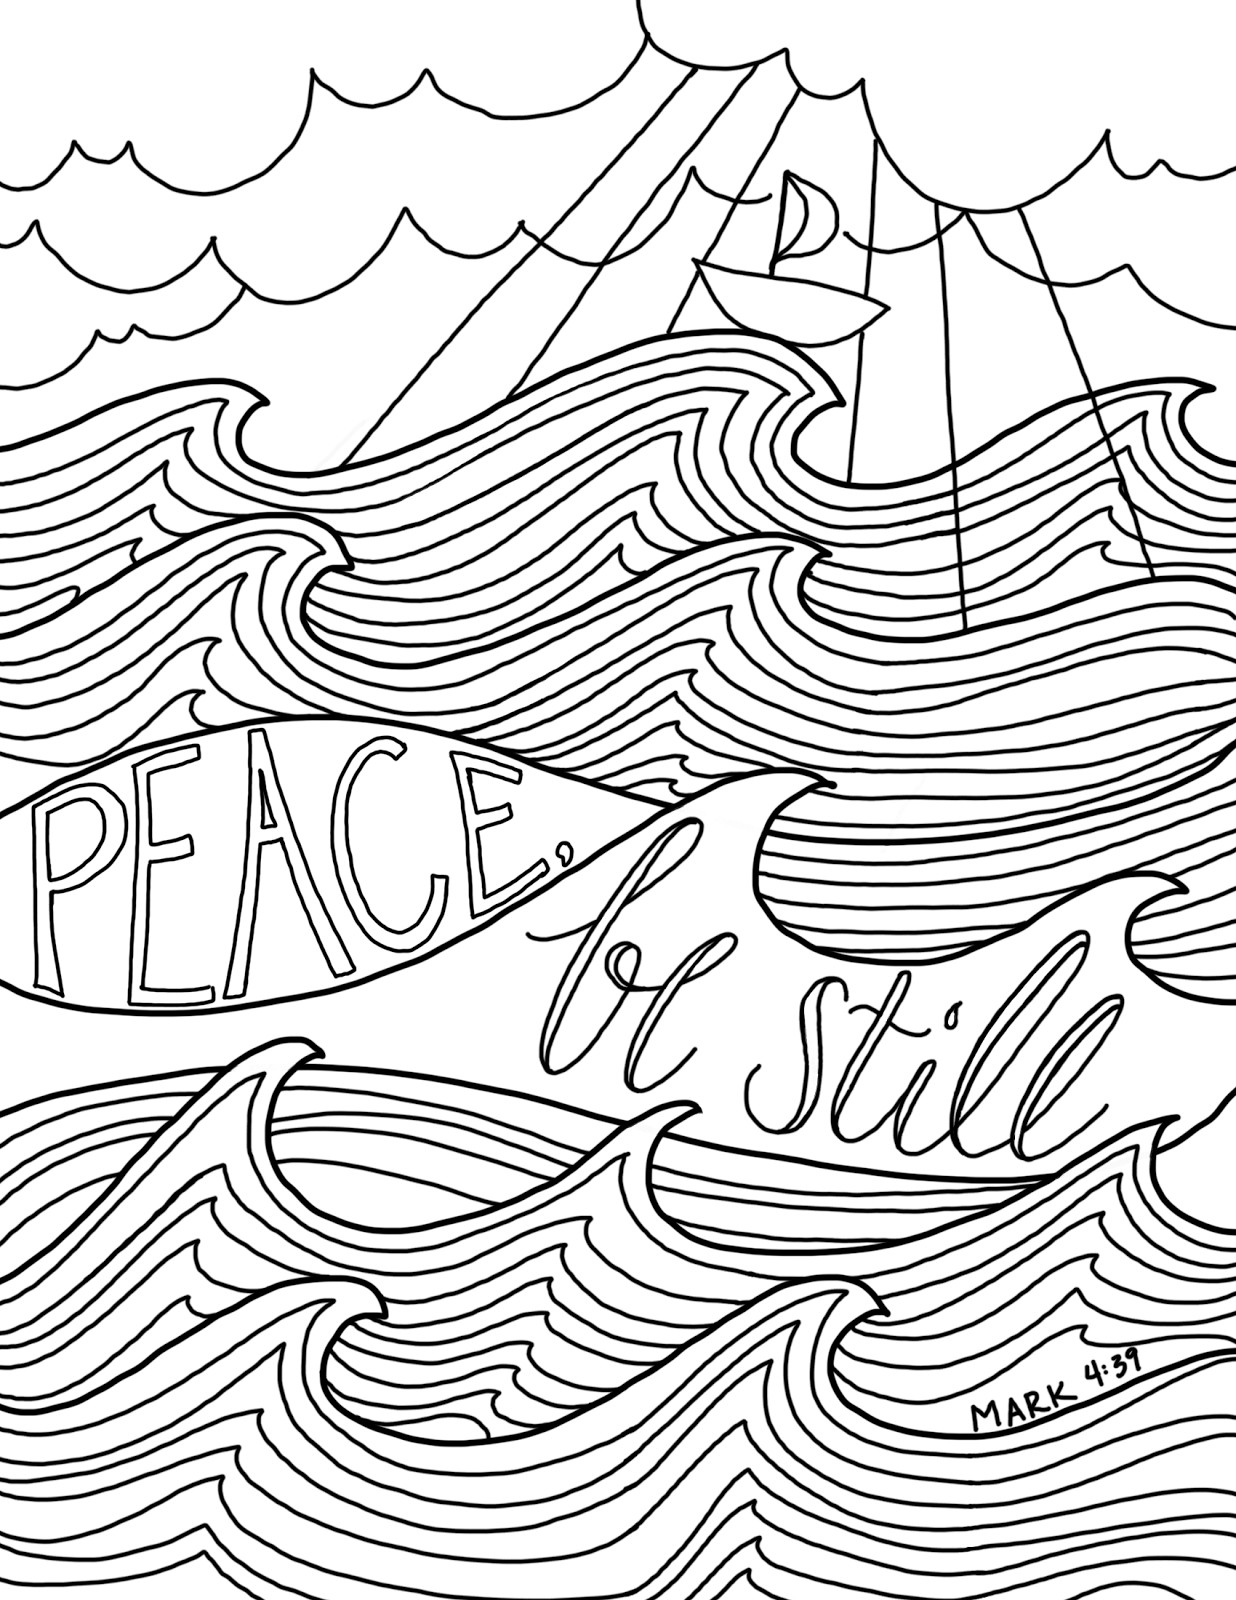 Lds Adult Coloring Pages
 just what i squeeze in Peace Be Still a new